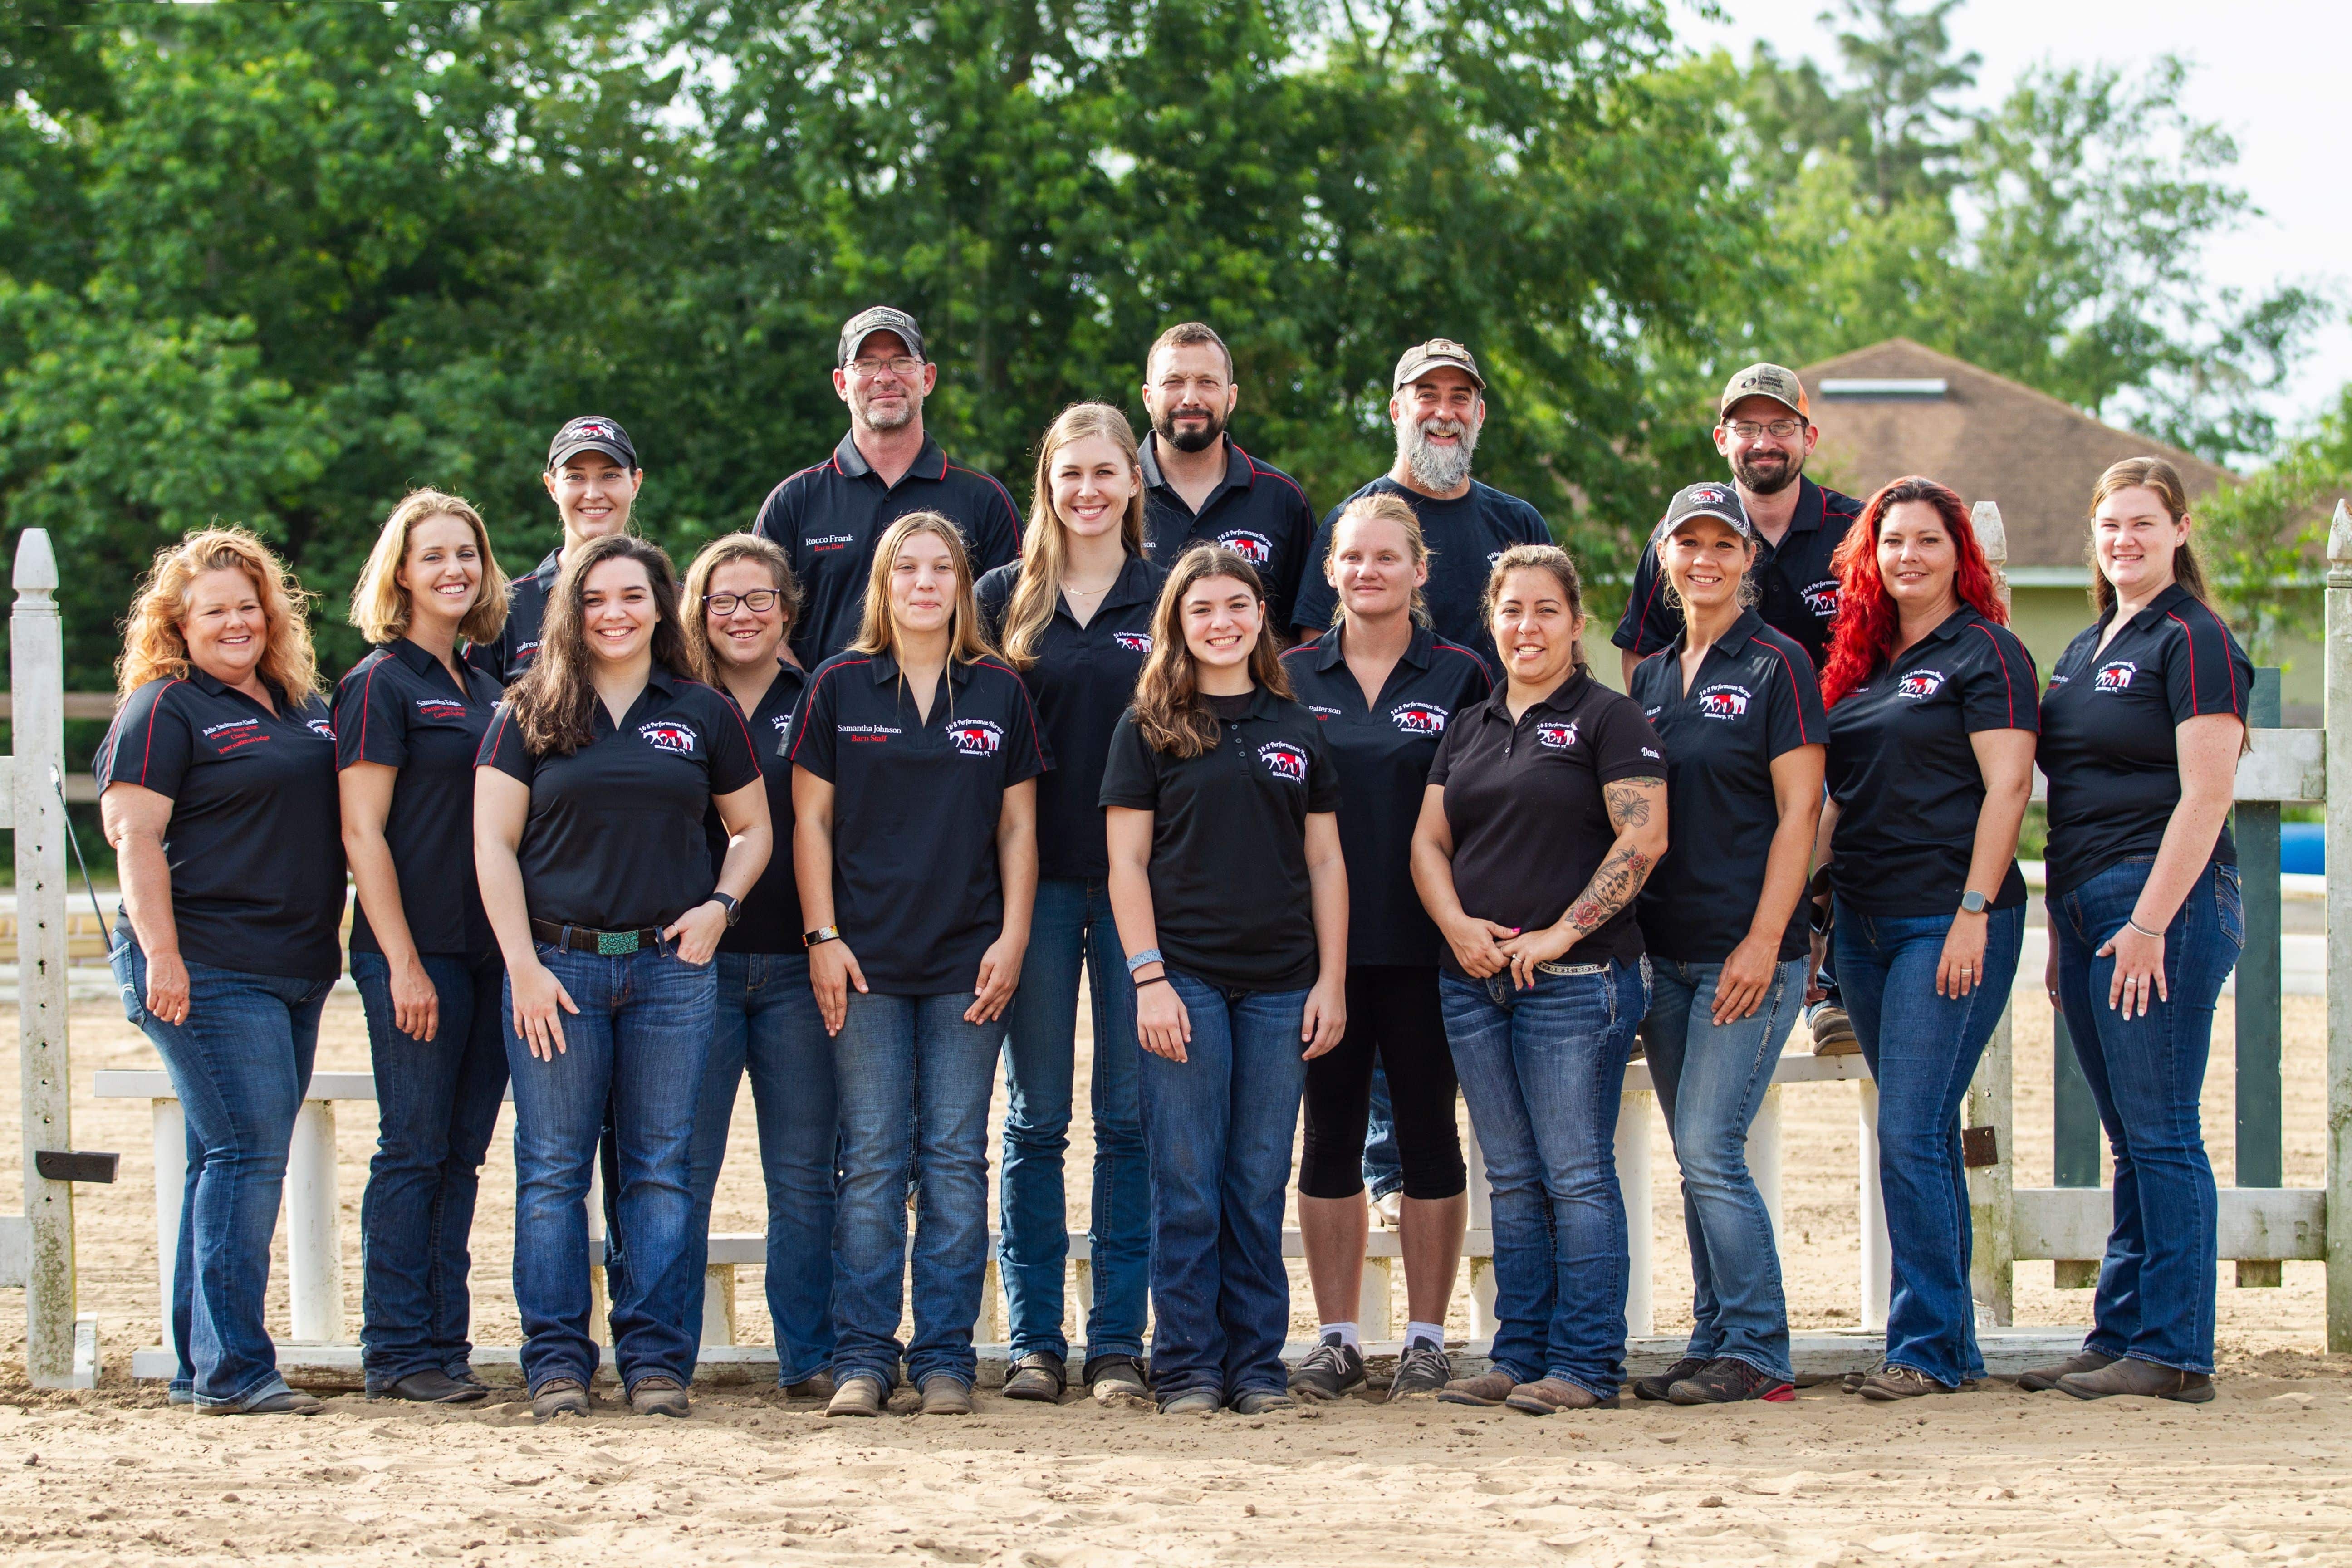 All of the staff and management at J & S are standing together for a group photo smiling. They are standing in front of a jump in the main arena.